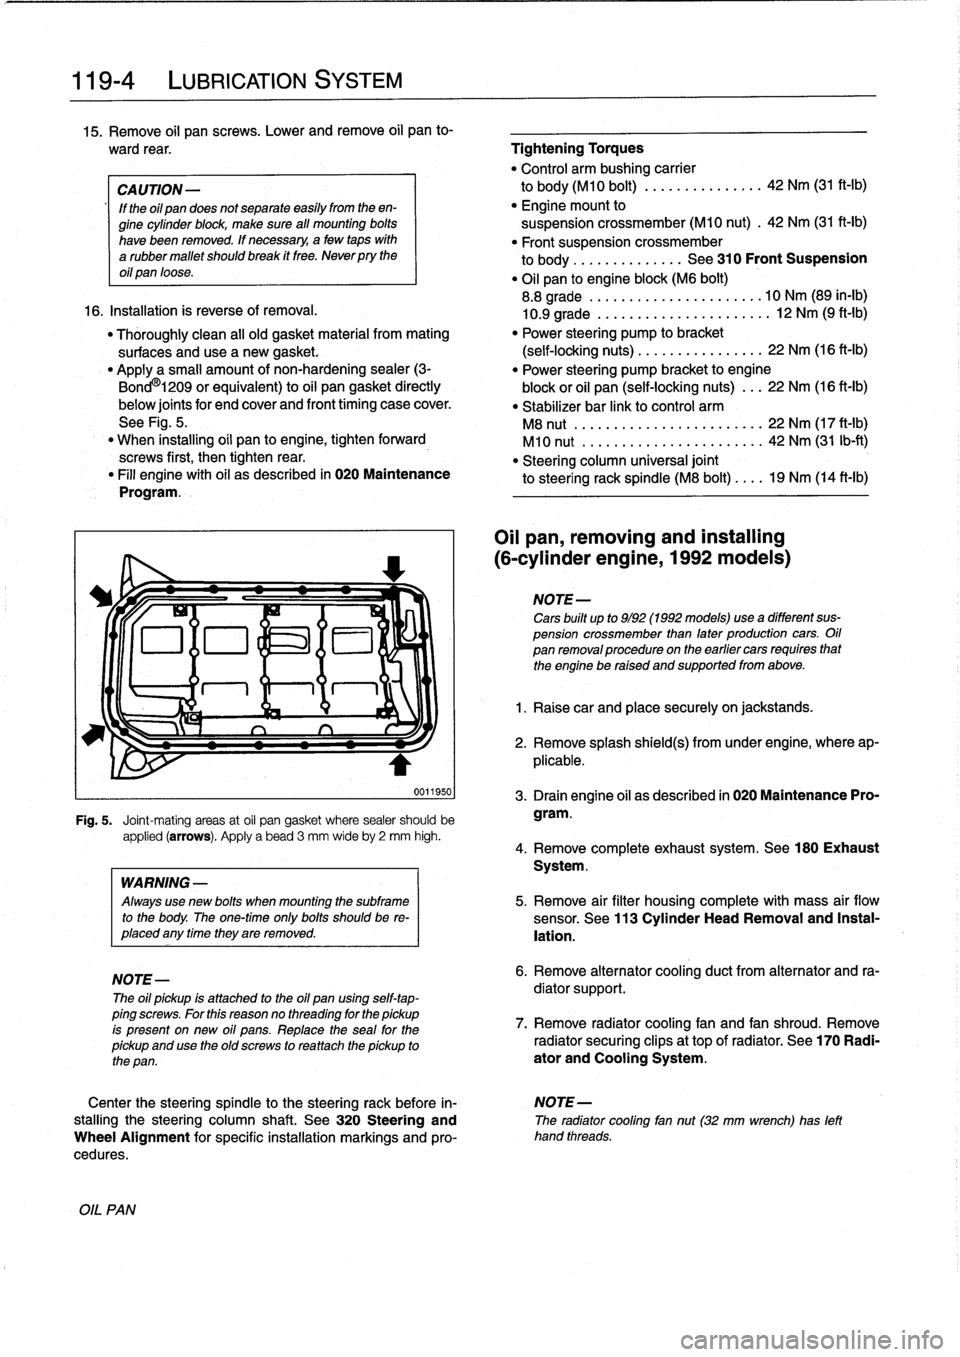 BMW M3 1996 E36 Workshop Manual 
119-
4

	

LUBRICATION
SYSTEM

15
.
Remove
oil
pan
screws
.
Lower
andremove
oil
pan
to-

ward
rear
.

	

Tightening
Torques

"
Control
arm
bushing
carrier

CAUTION-

	

to
body(M10
bolt)
............